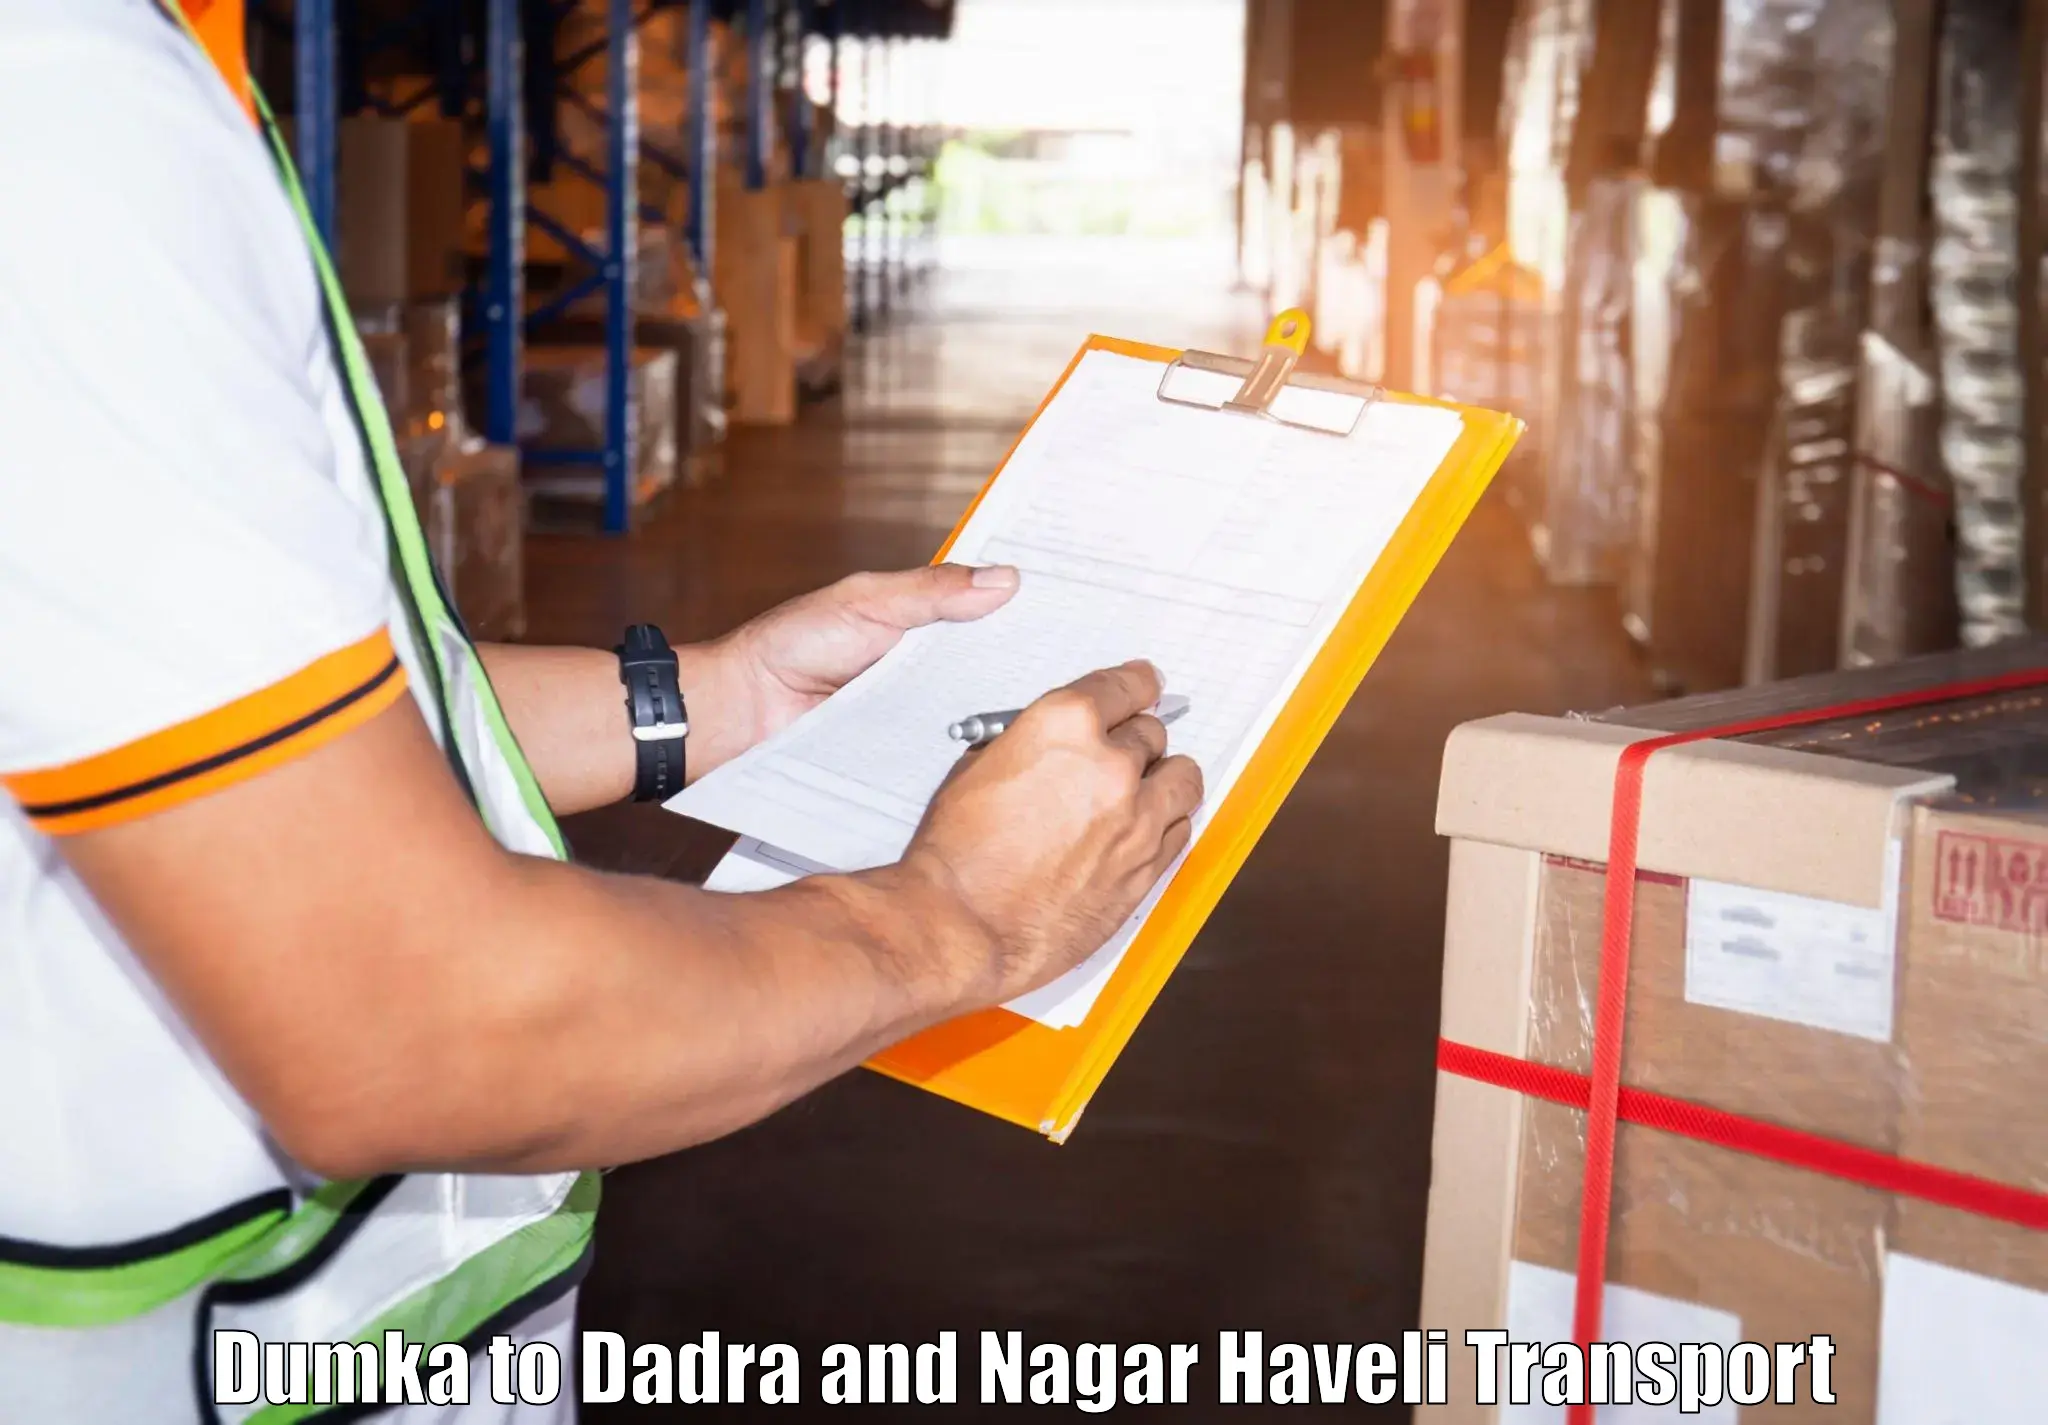 Best transport services in India Dumka to Dadra and Nagar Haveli